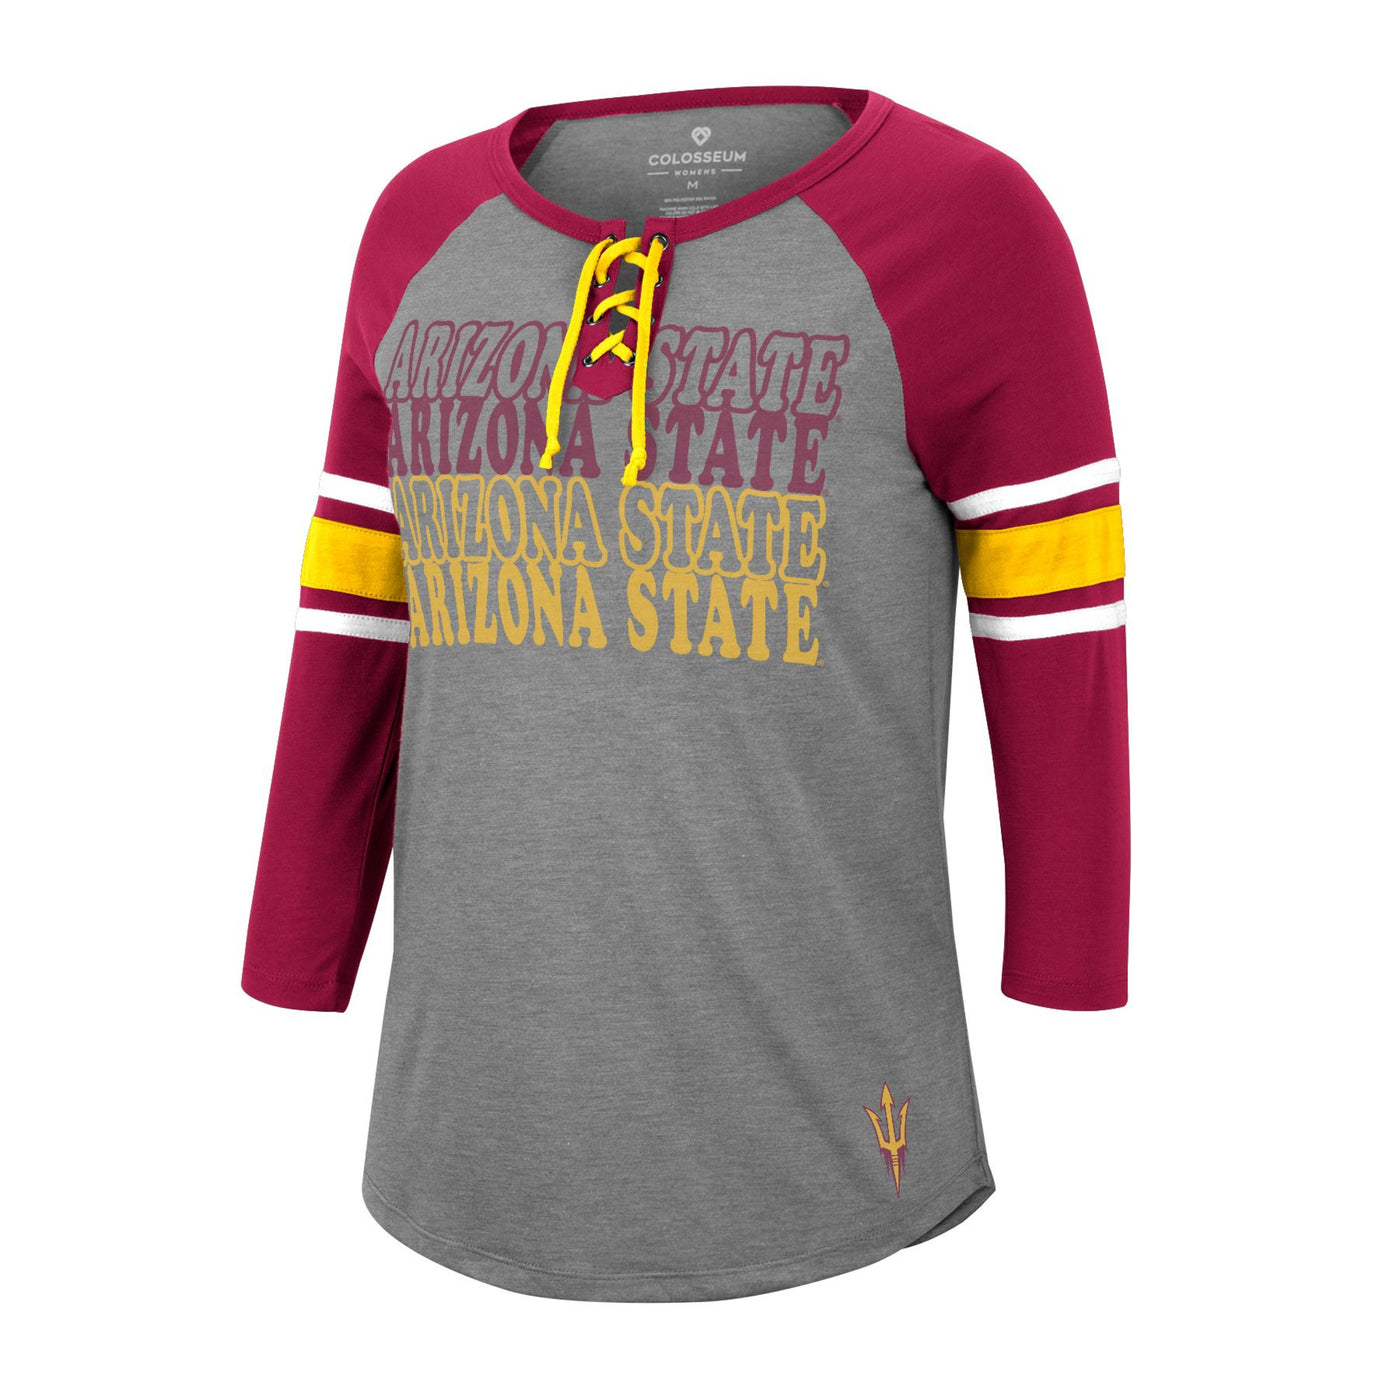 ASU maroon and grey long sleeve. Arizona State text is repeated four times in bubble font in maroon and gold. The collar has a v neck that is laced up with a gold string. Both sleeves have one gold and two white bands around the elbows. 